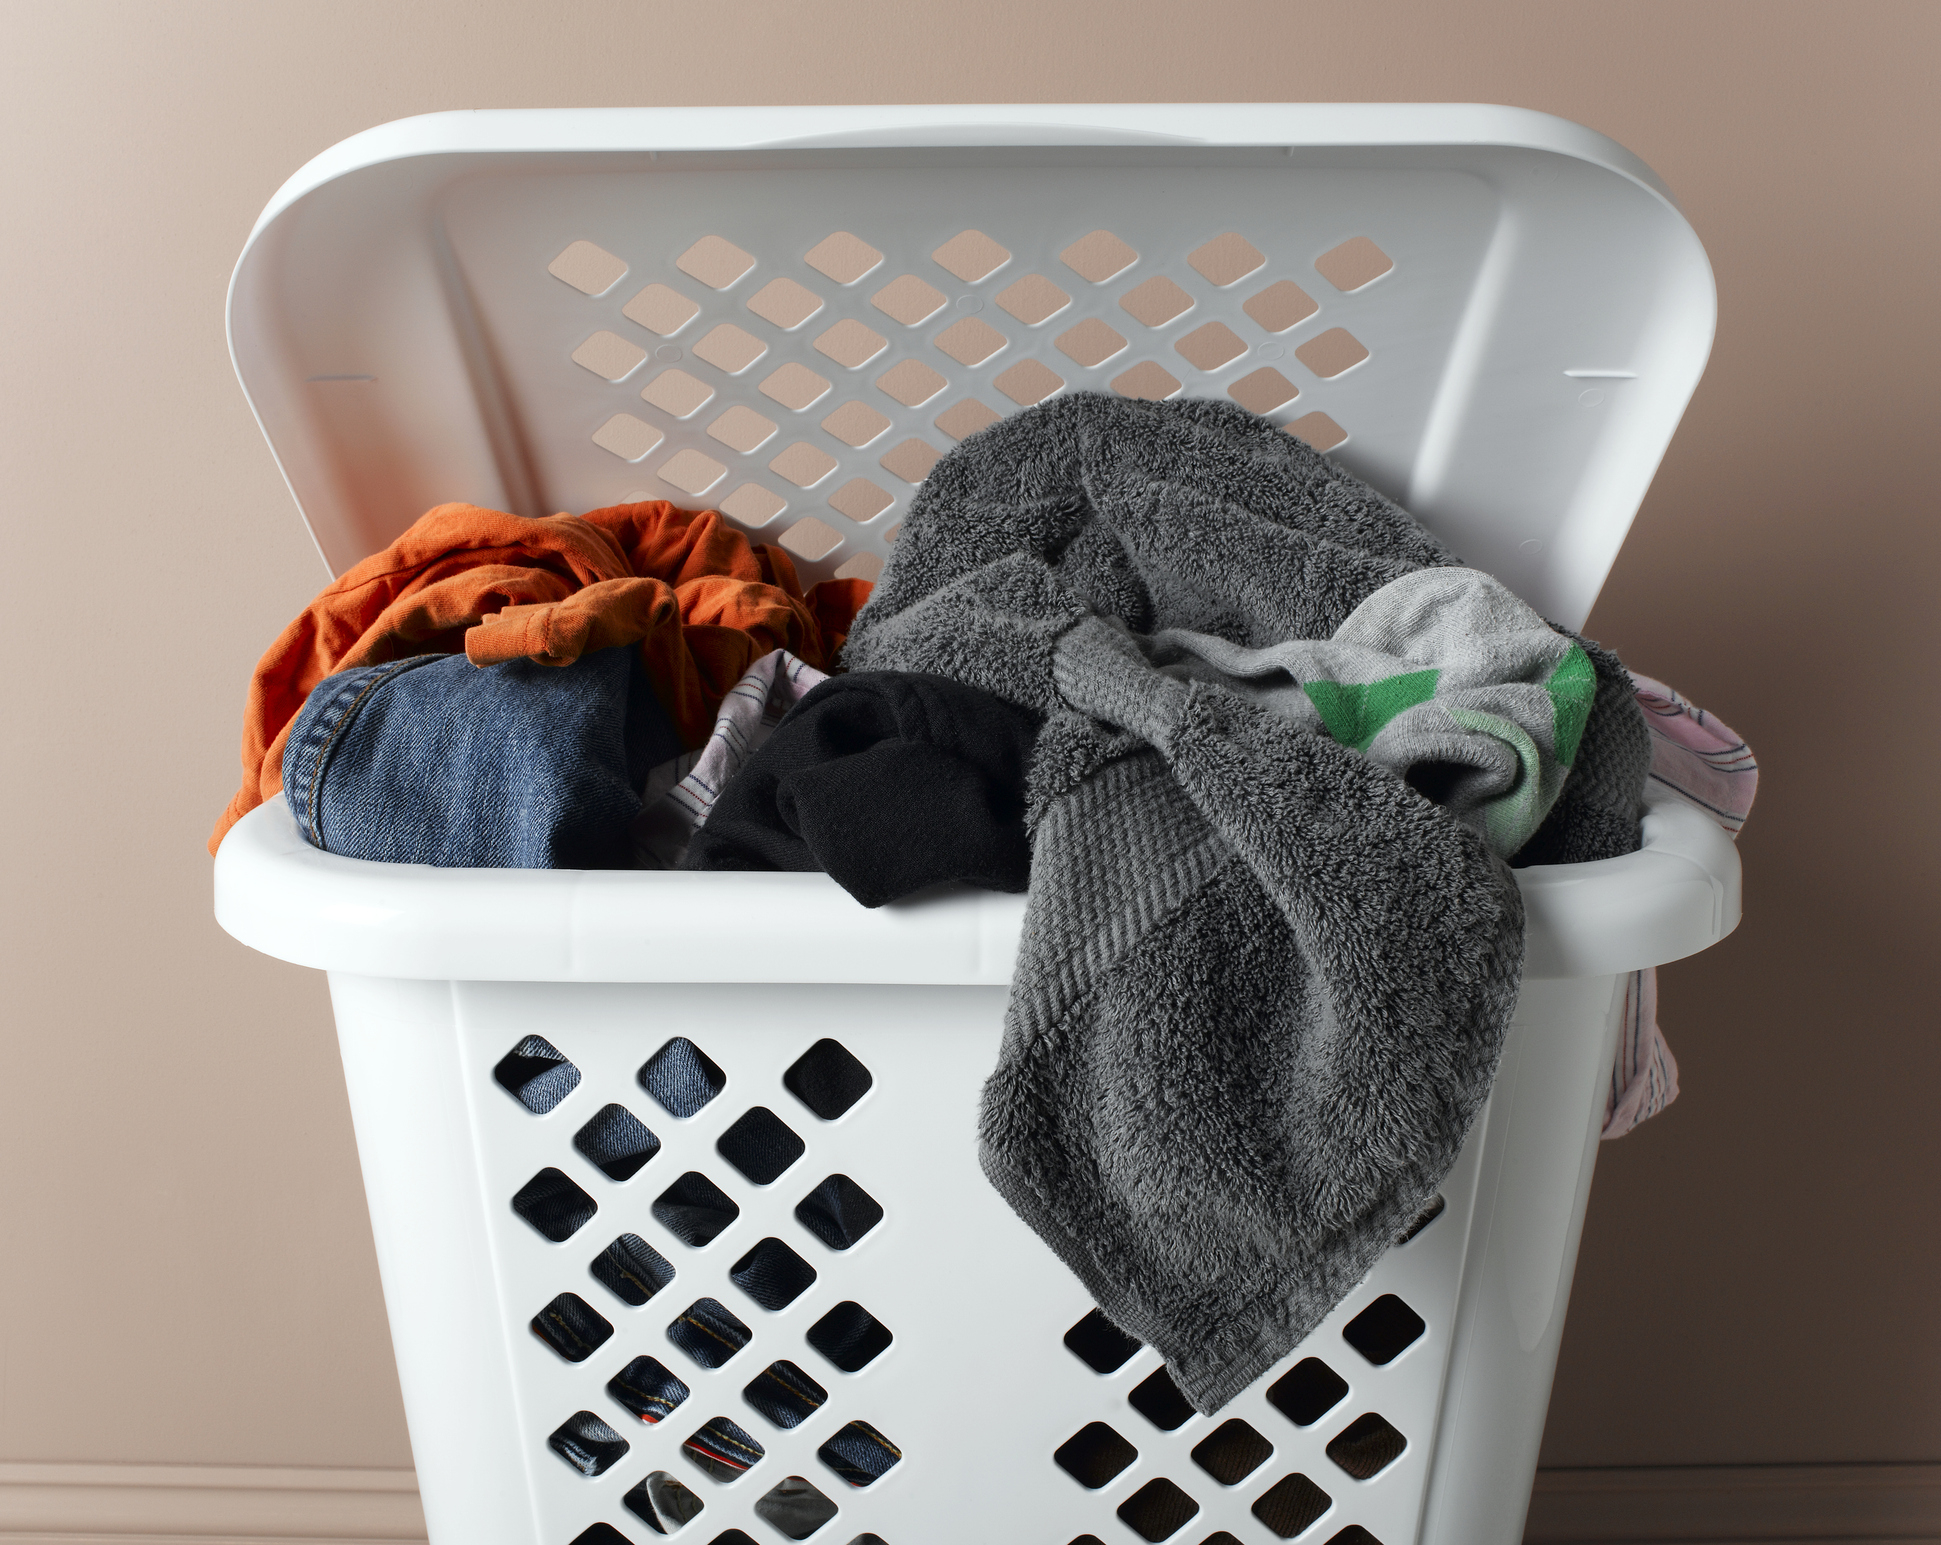 A laundry basket filled with various clothes